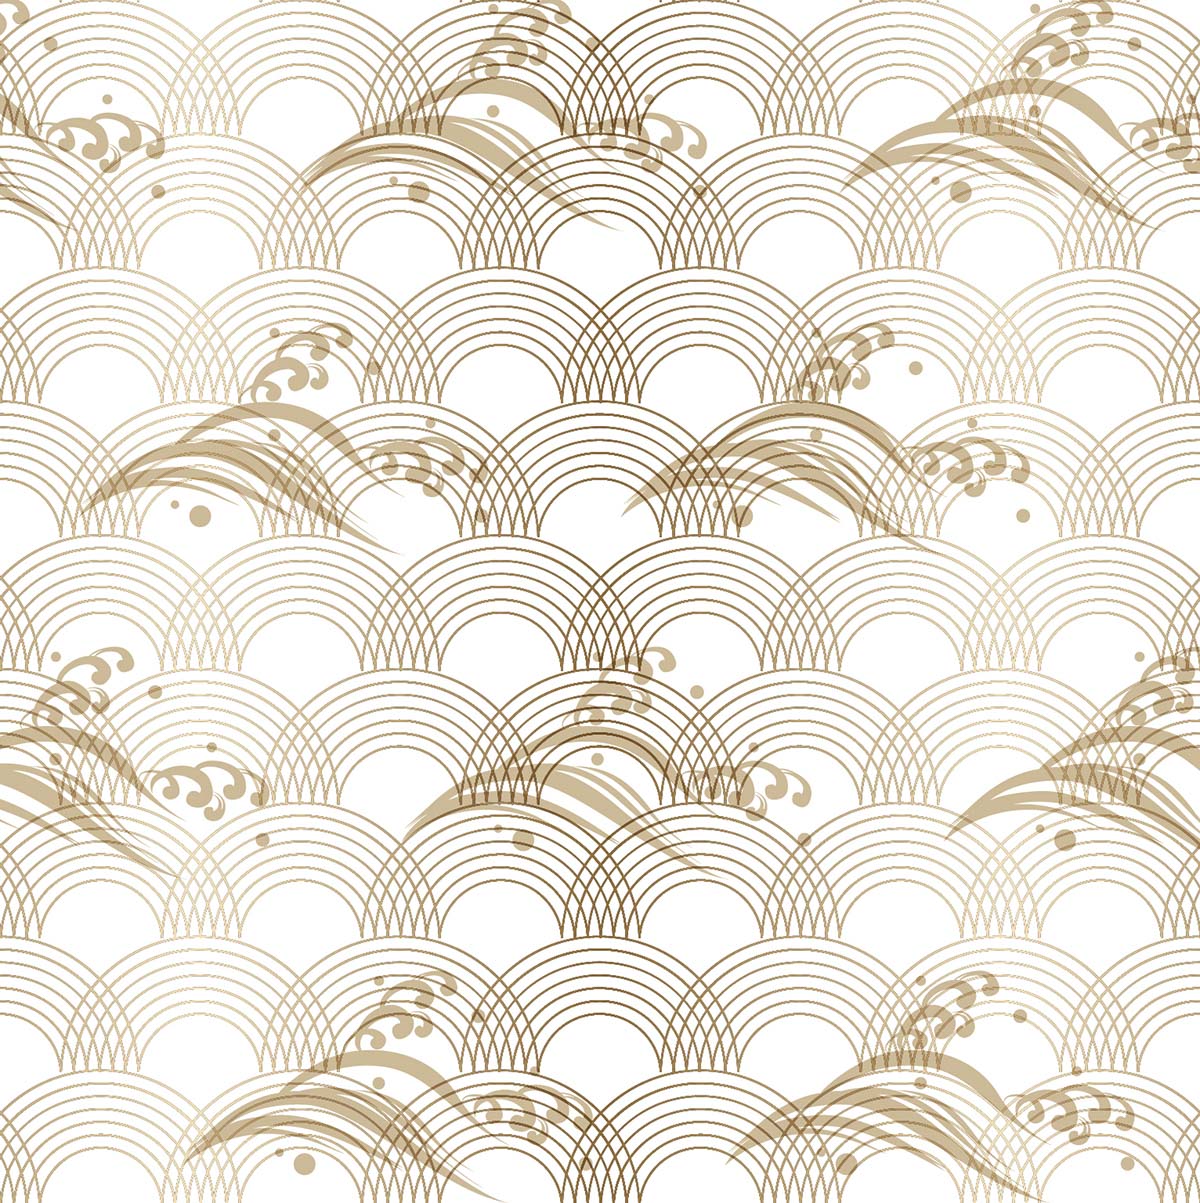 A pattern of gold and white waves